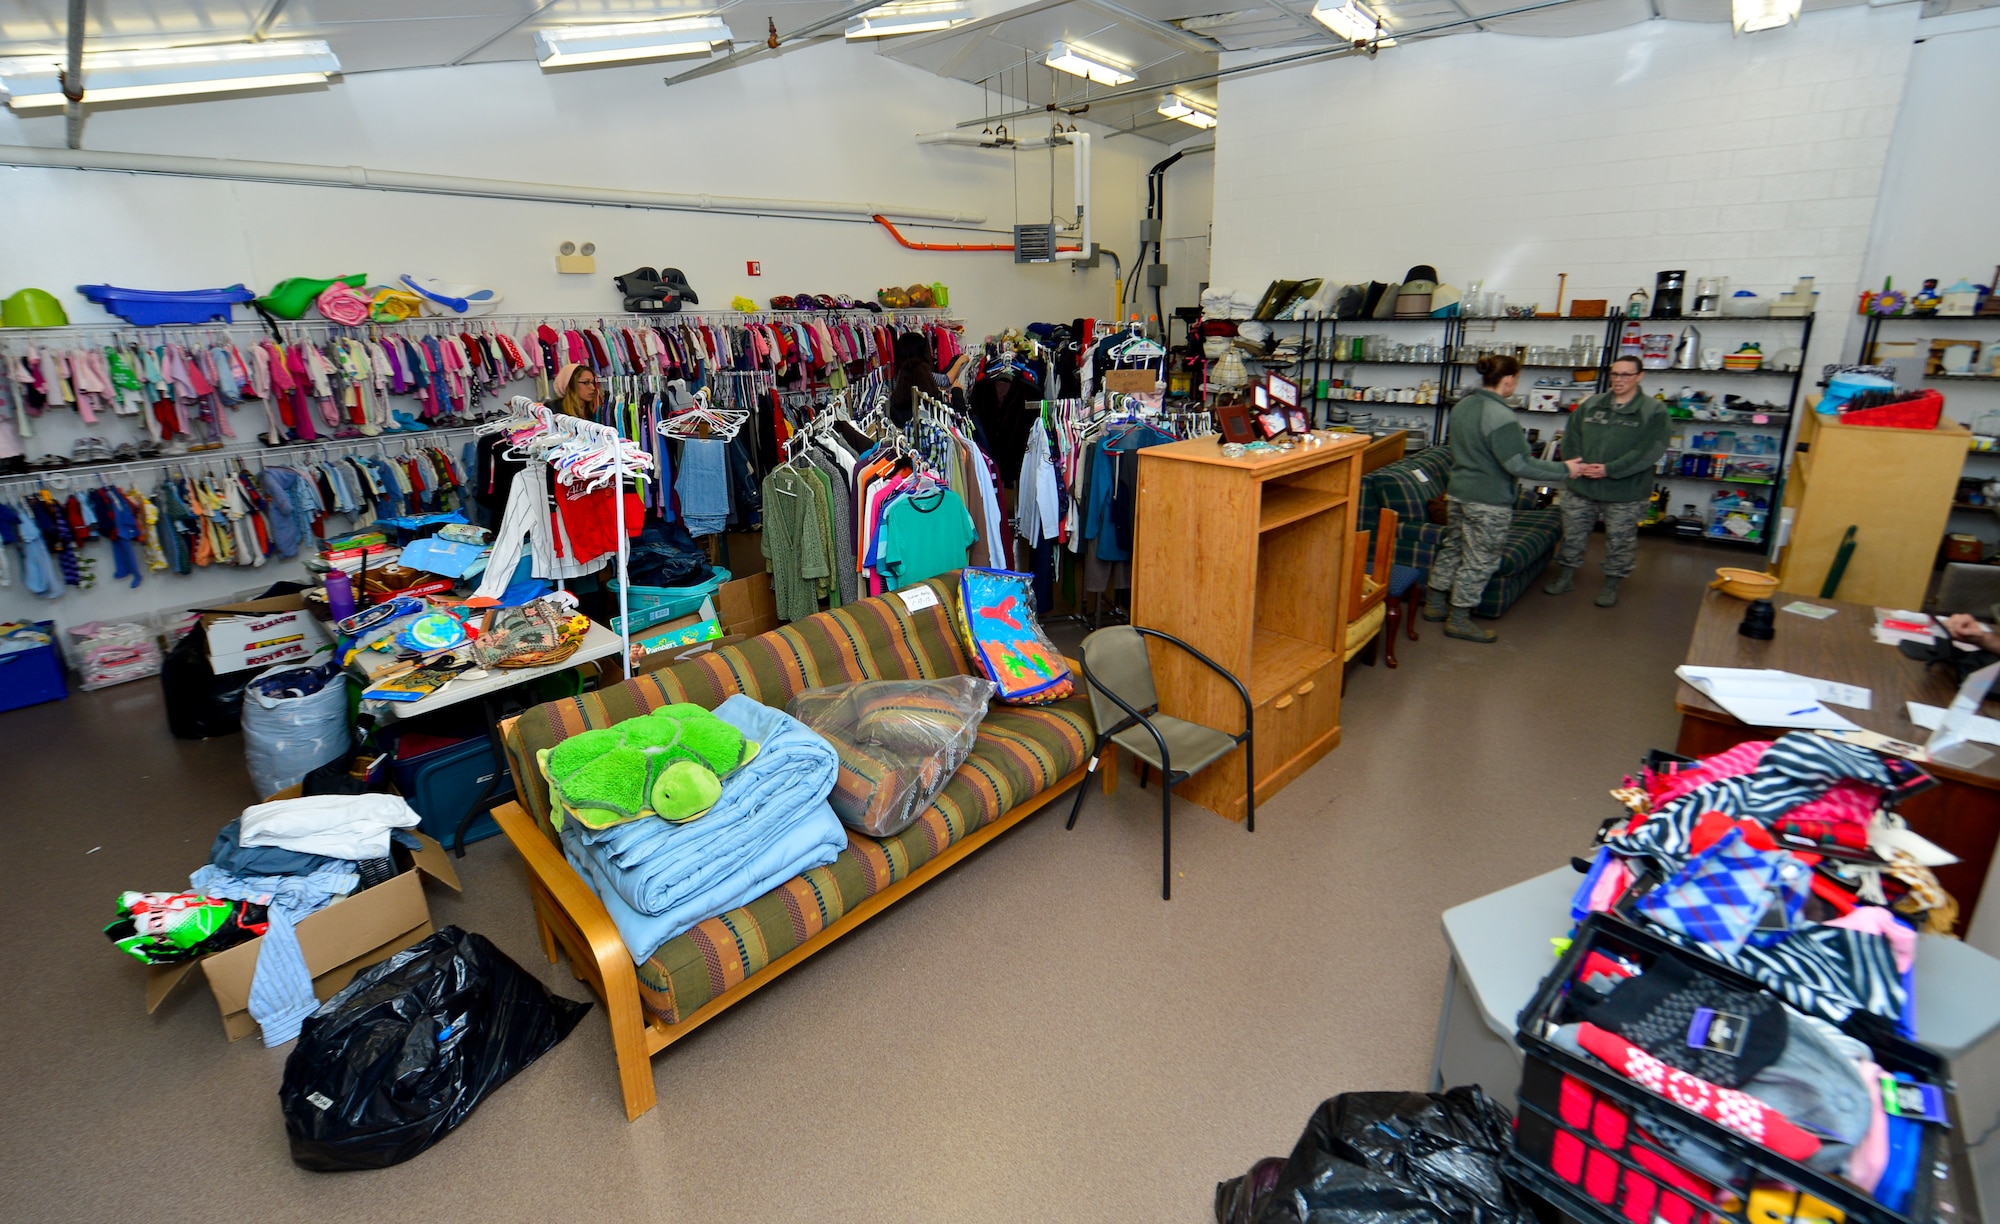 The Airman’s Attic sits stocked with children’s clothes, furniture and other house hold items that Airman can shop through for free Jan. 23, 2015, at Dover Air Force Base, Del. The Airman’s Attic is open Mondays from 4:00 to 6:00 p.m., and Wednesdays and Fridays from 10:00 a.m. to  1:00 p.m. (U.S. Air Force photo/Airman 1st Class William Johnson)